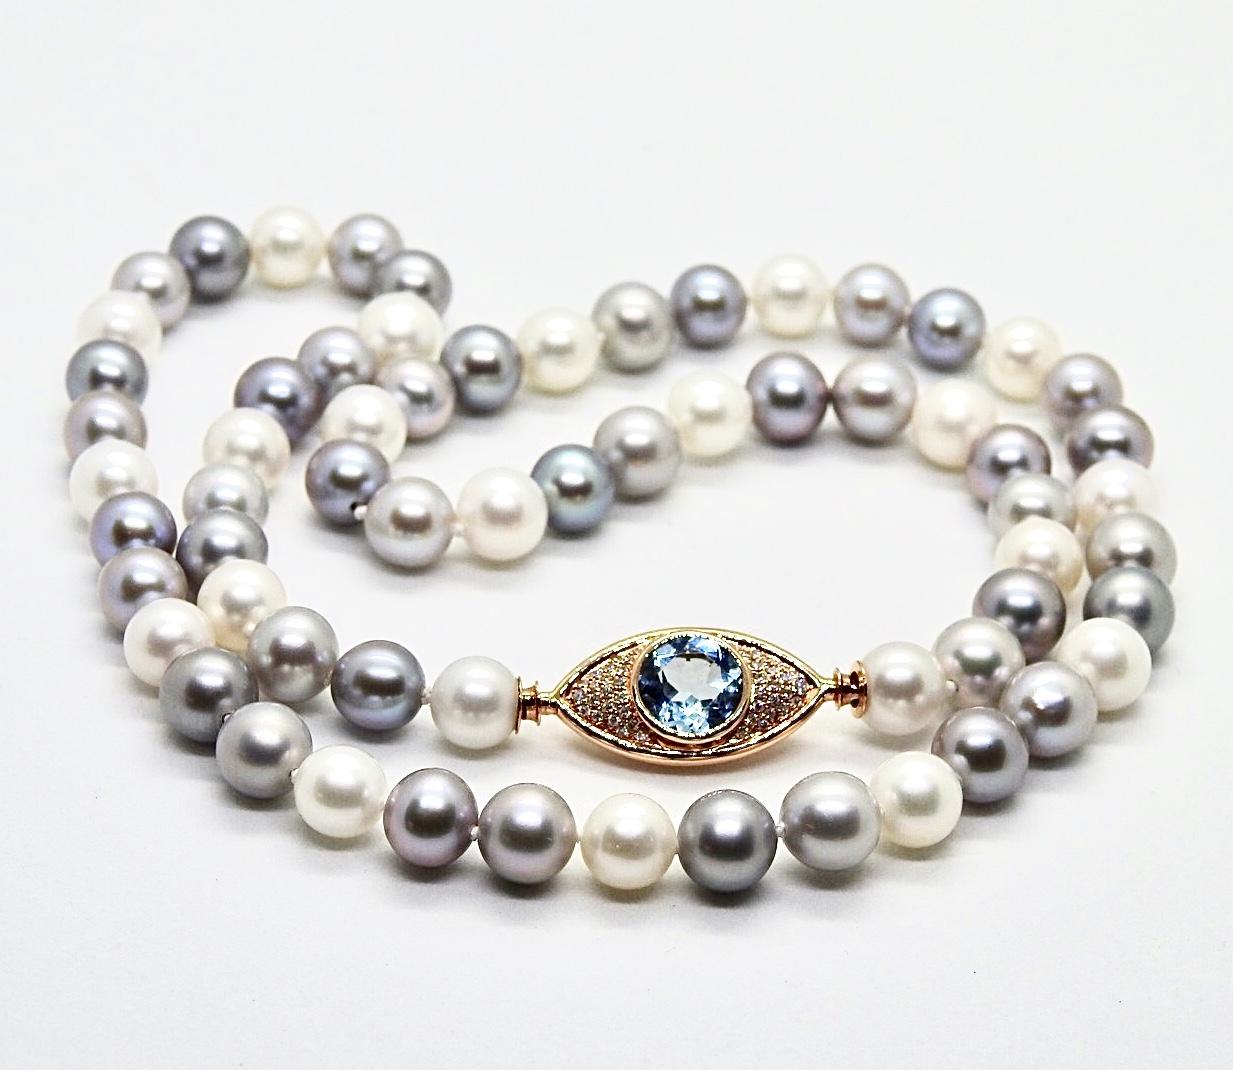 Round Cut Pearls Necklace with 18 Karat Gold, Diamonds and Sky Blue Topaz Eye Clasp For Sale